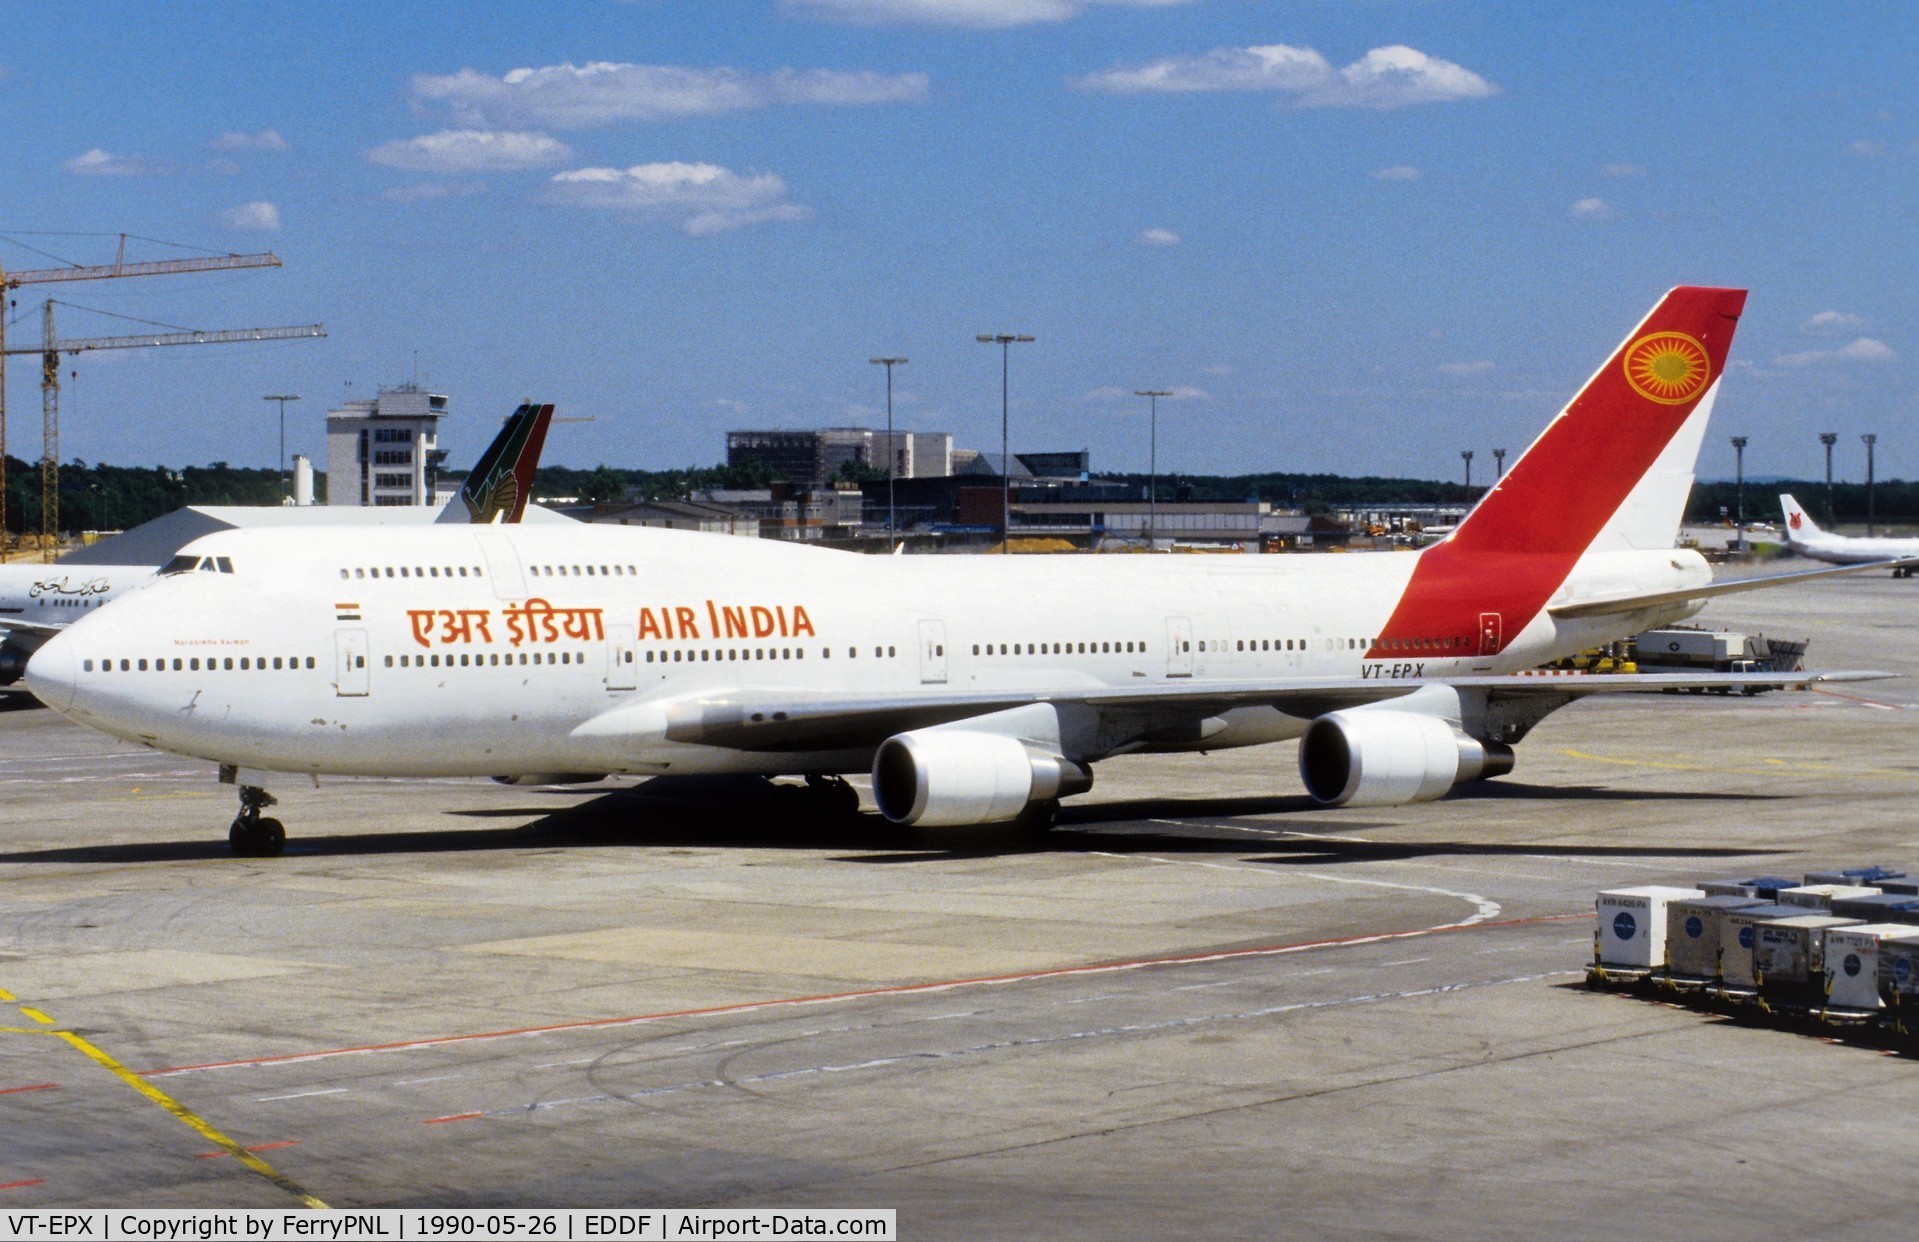 VT-EPX, 1988 Boeing 747-337 C/N 24160, Air India in short lived livery